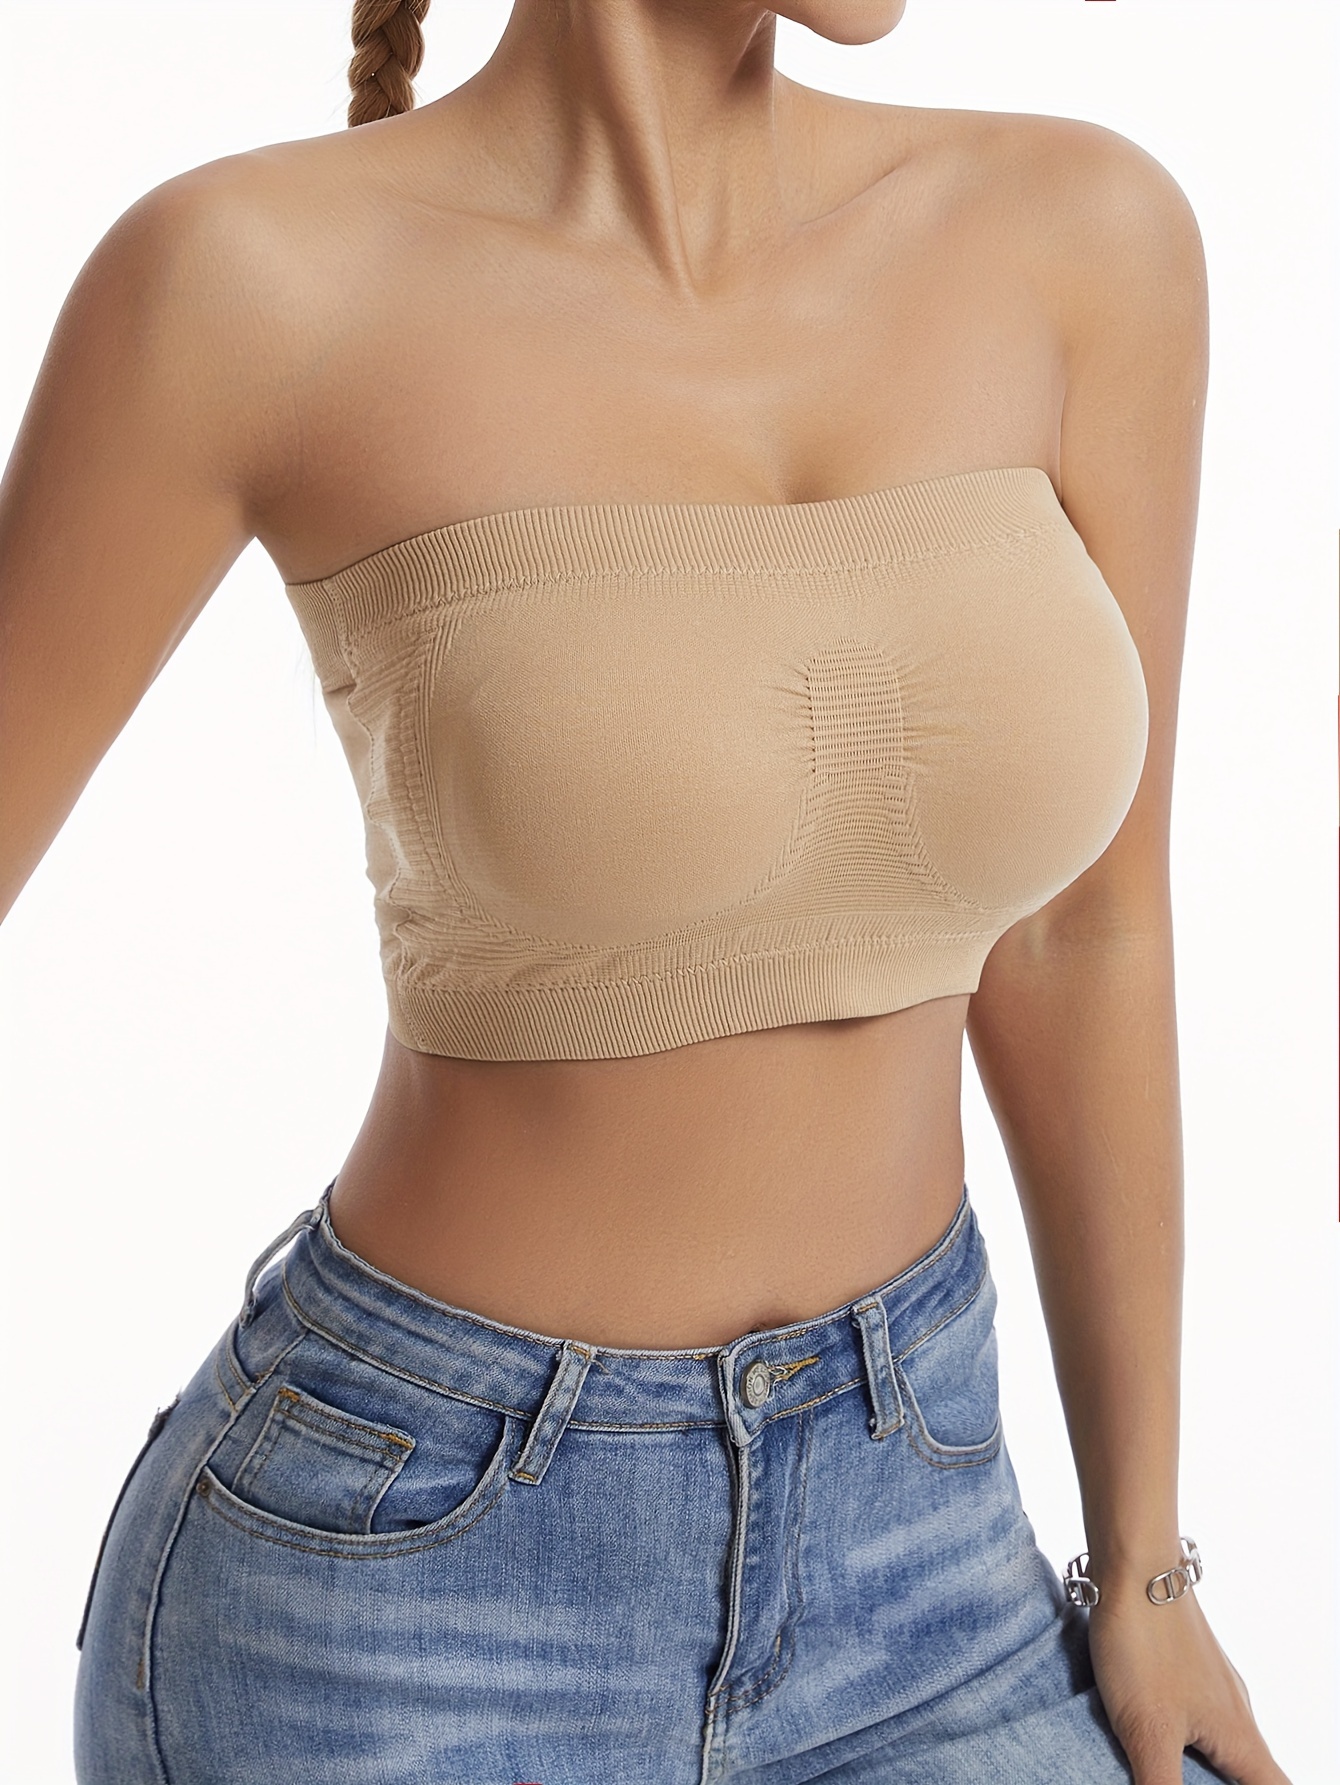 Seamless Tube Top Bra Non Wire Lingerie For Women: Comfortable, Sexy &  Supportive Perfect For Intimates From Tiangouu, $9.1